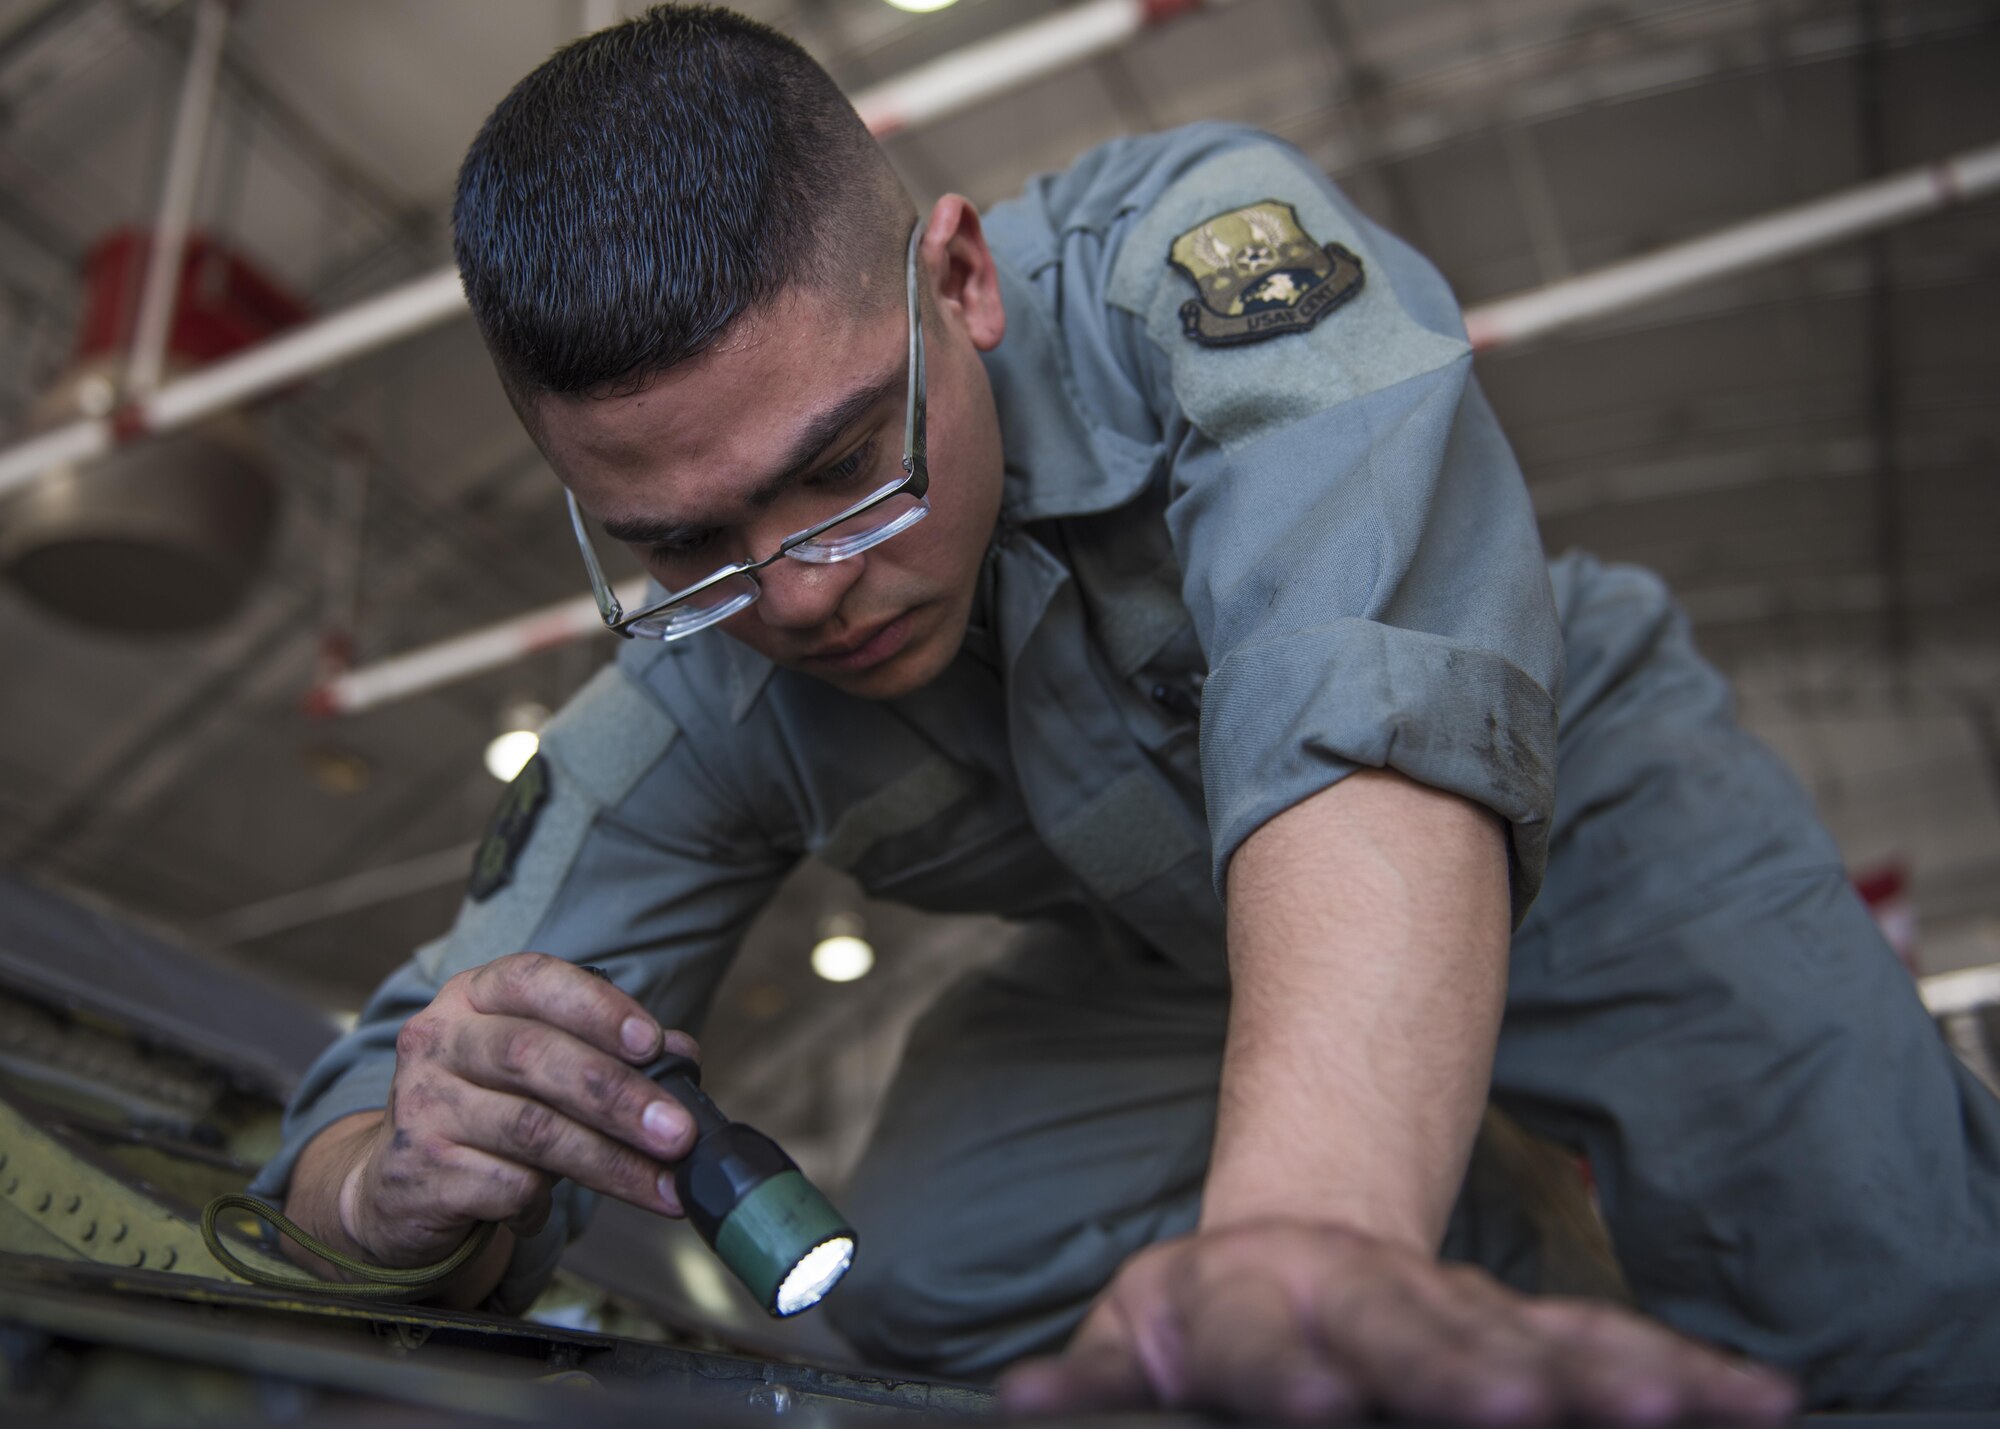 Staff Sgt. Juan Flores, 455th Expeditionary Maintenance Squadron electrical environment engineer, conducts a wire inspection on an F-16C Fighting Falcon, Bagram Airfield, Afghanistan, Aug. 22, 2016. During a 300 hour inspection, wires are checked for chafing, fire safety purposes, and to make sure major components are able to function properly. (U.S. Air Force photo by Senior Airman Justyn M. Freeman)